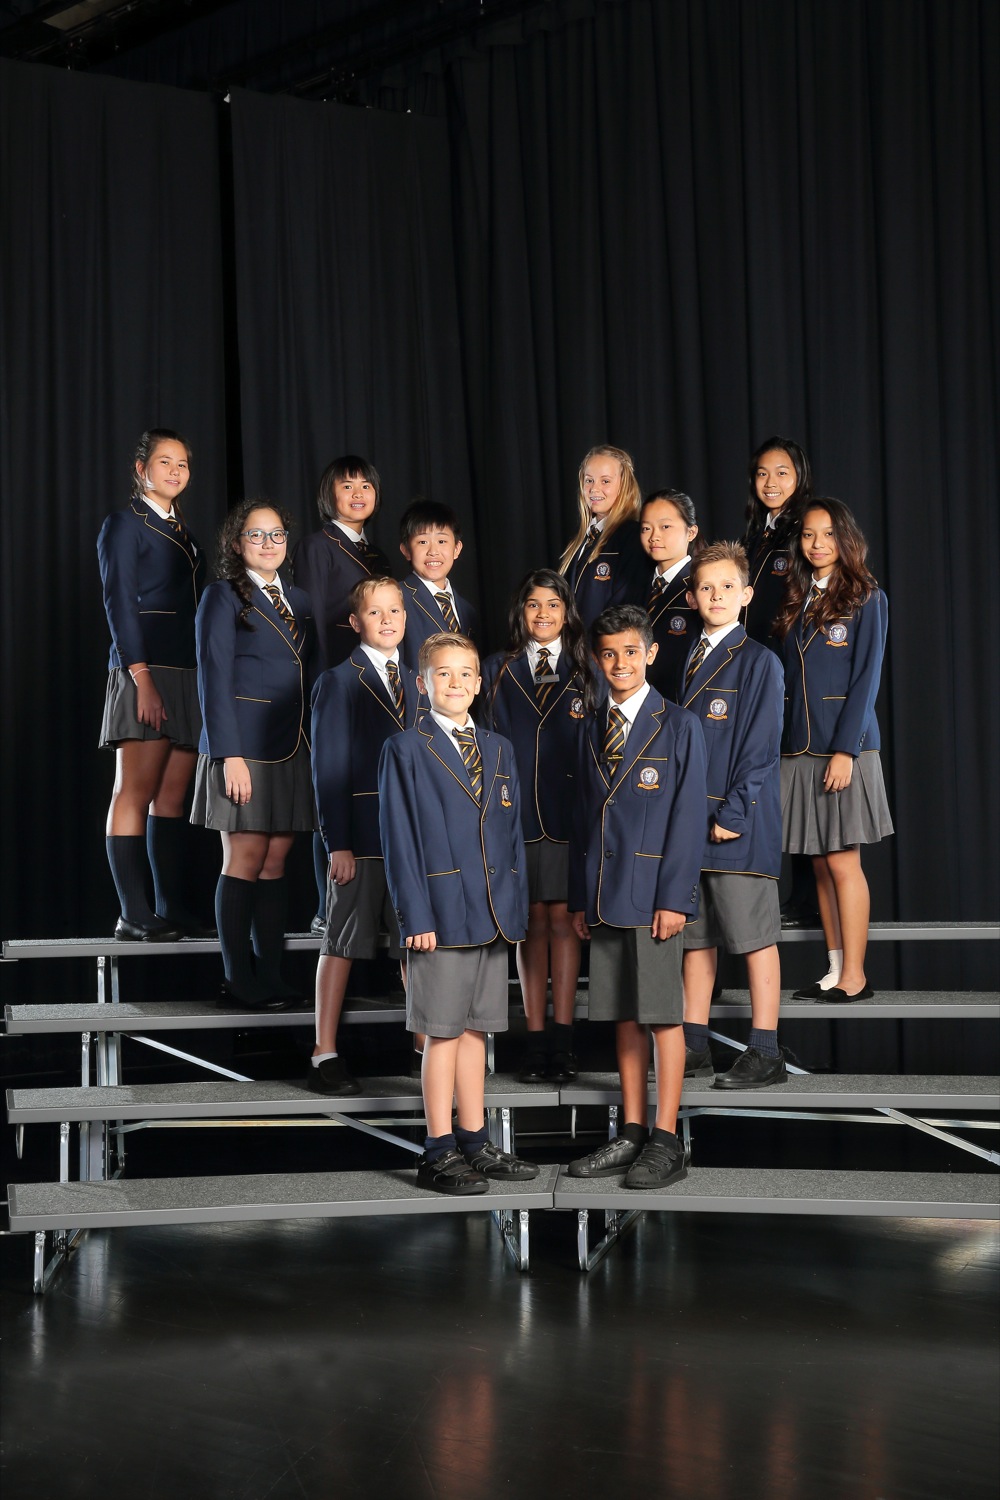 BSKL Student Council and Sports House Photo Shoot